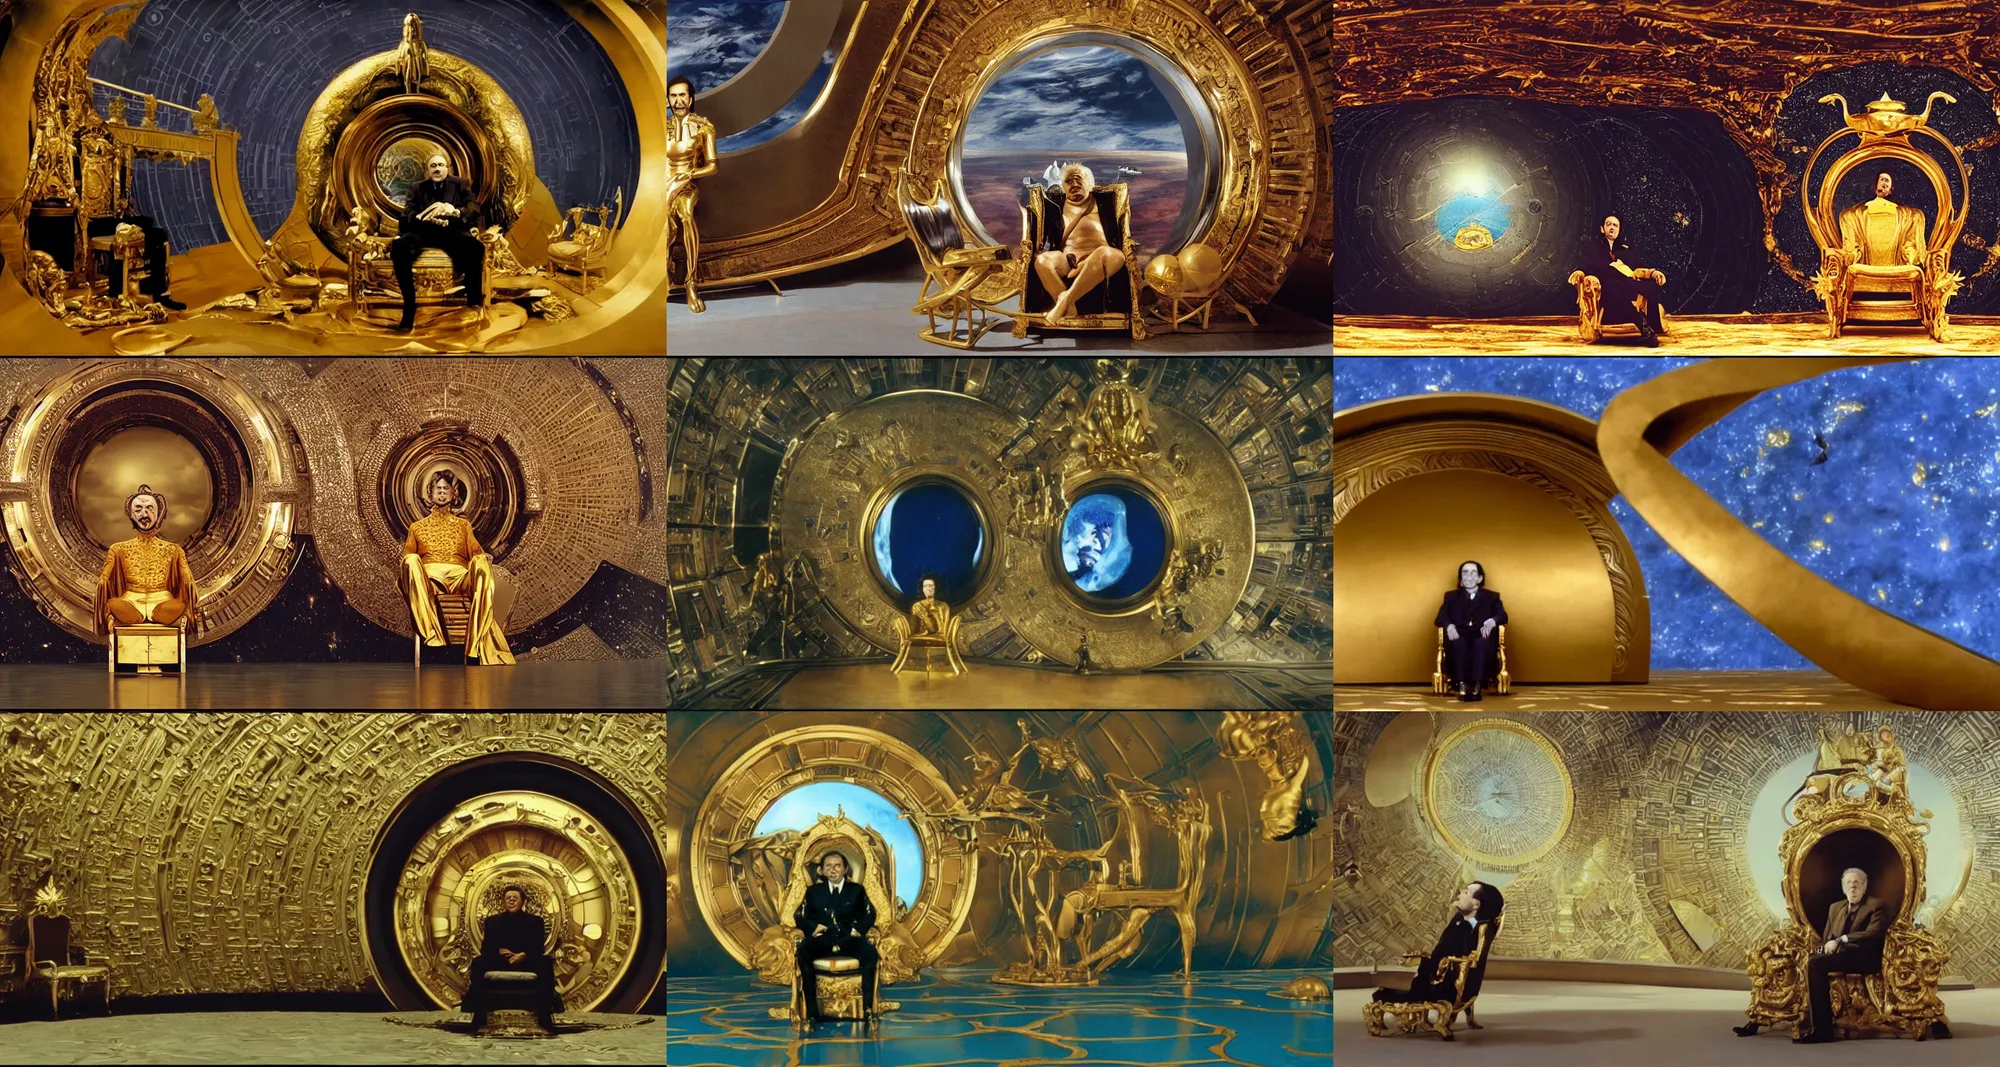 Prompt: salvador dali as emperor of universe sits on gold futuristic chair in front of huge central porthole in which is visible highly detailed planet arrakis | still frame from the movie by alejandro jodorowsky with cinematogrophy of christopher doyle and art direction by hans giger, anamorphic lens, kodakchrome, 8 k